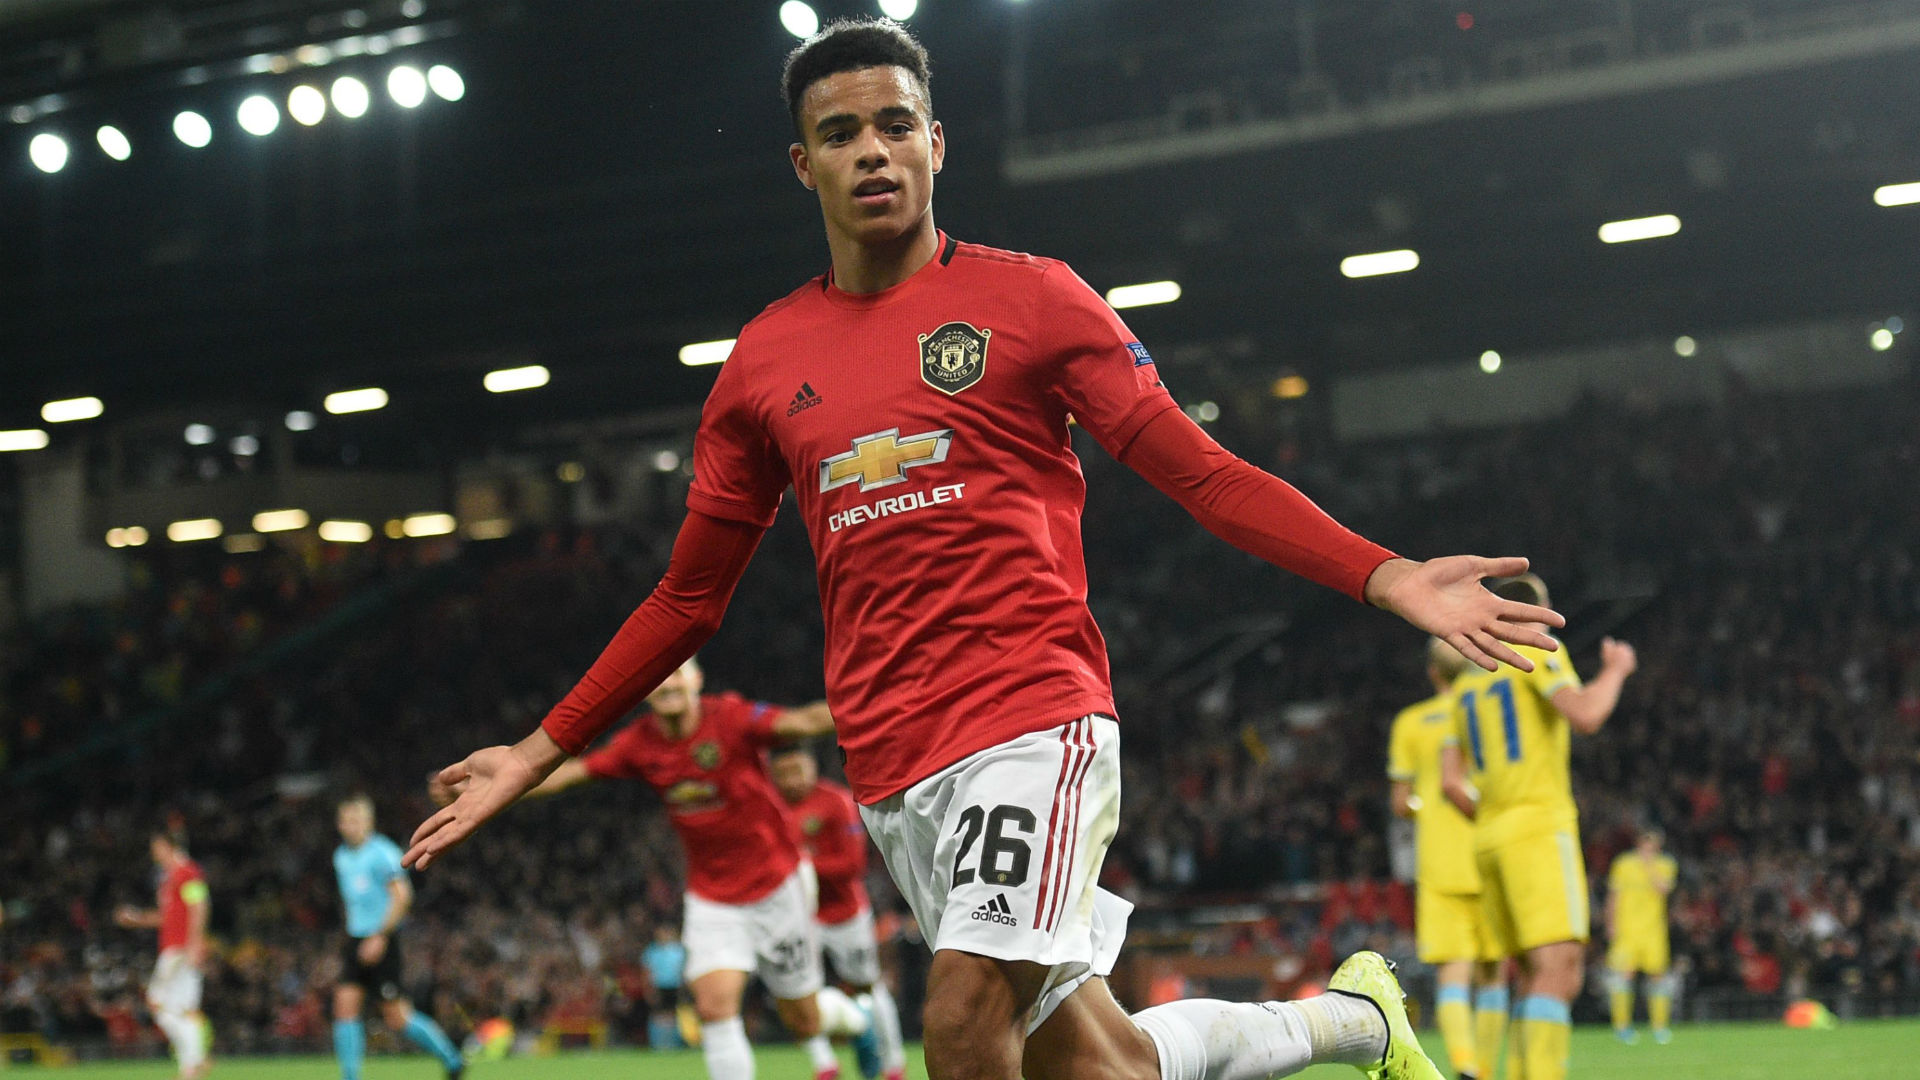 Man Utd tie Greenwood to new four-year contract